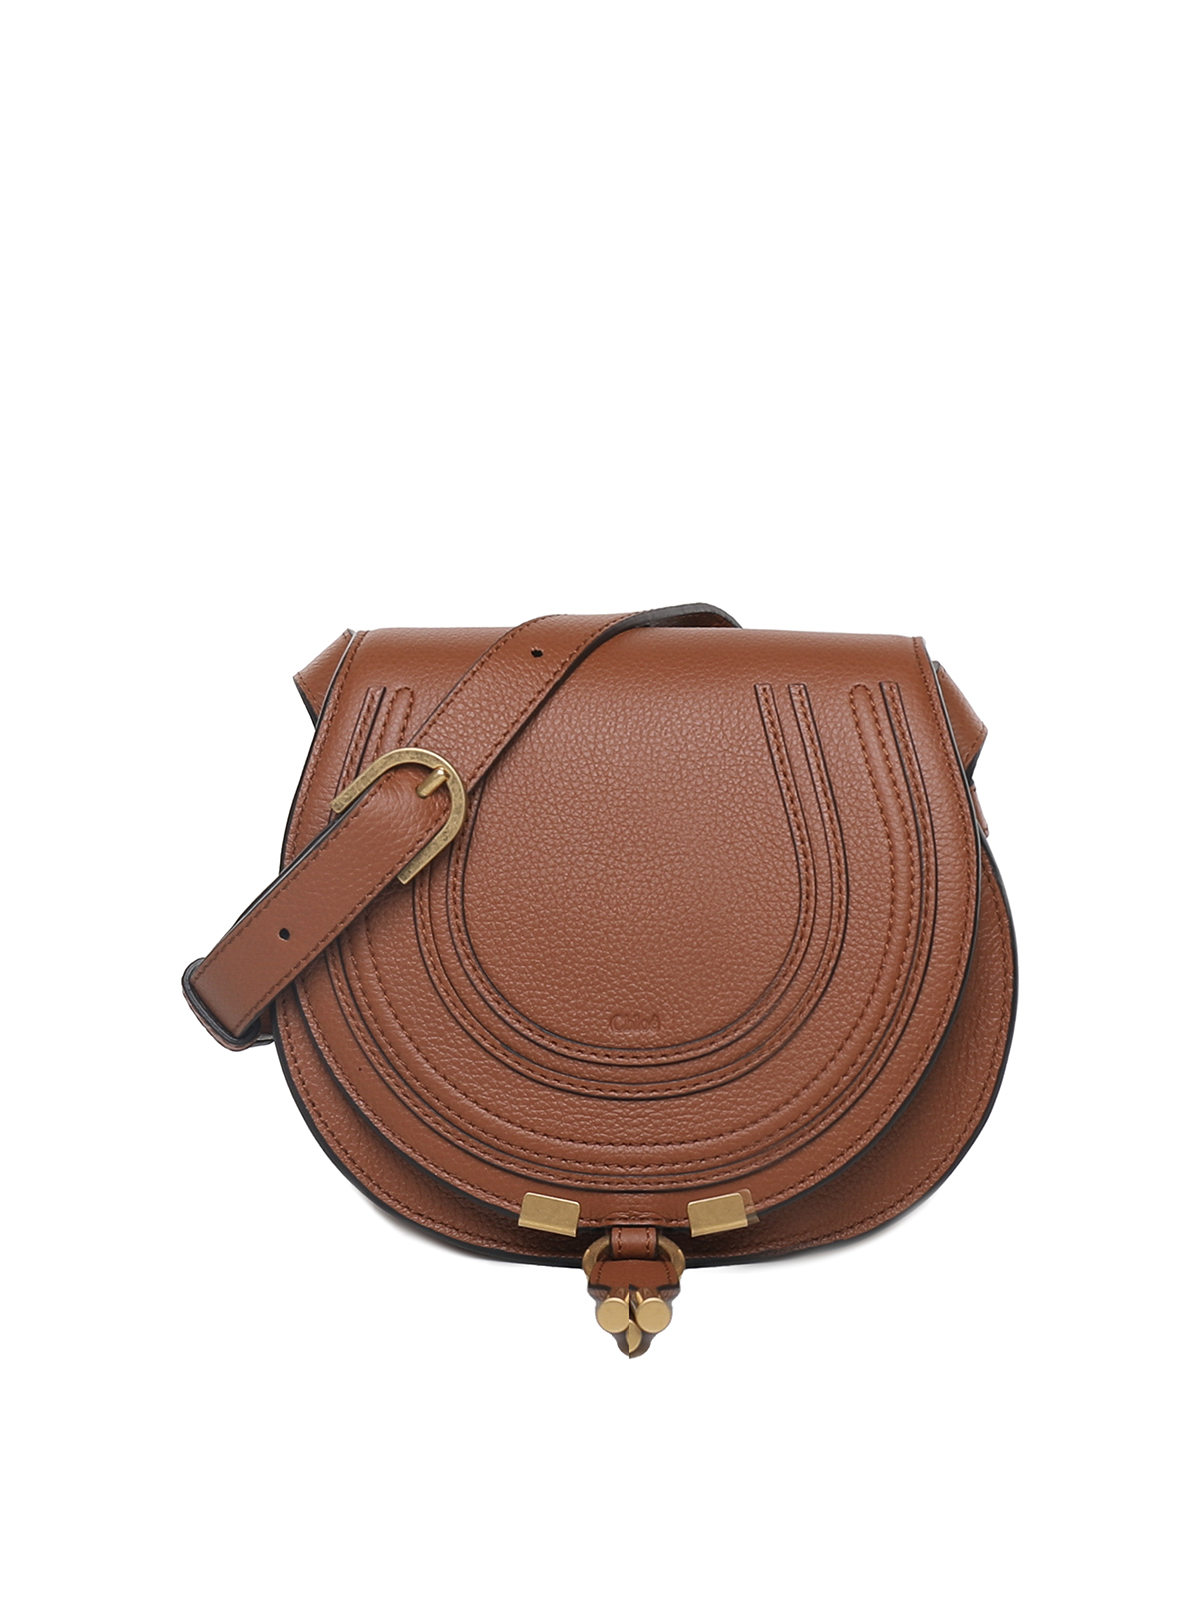 Chloé Hammered Leather Bag With Stitching In Brown